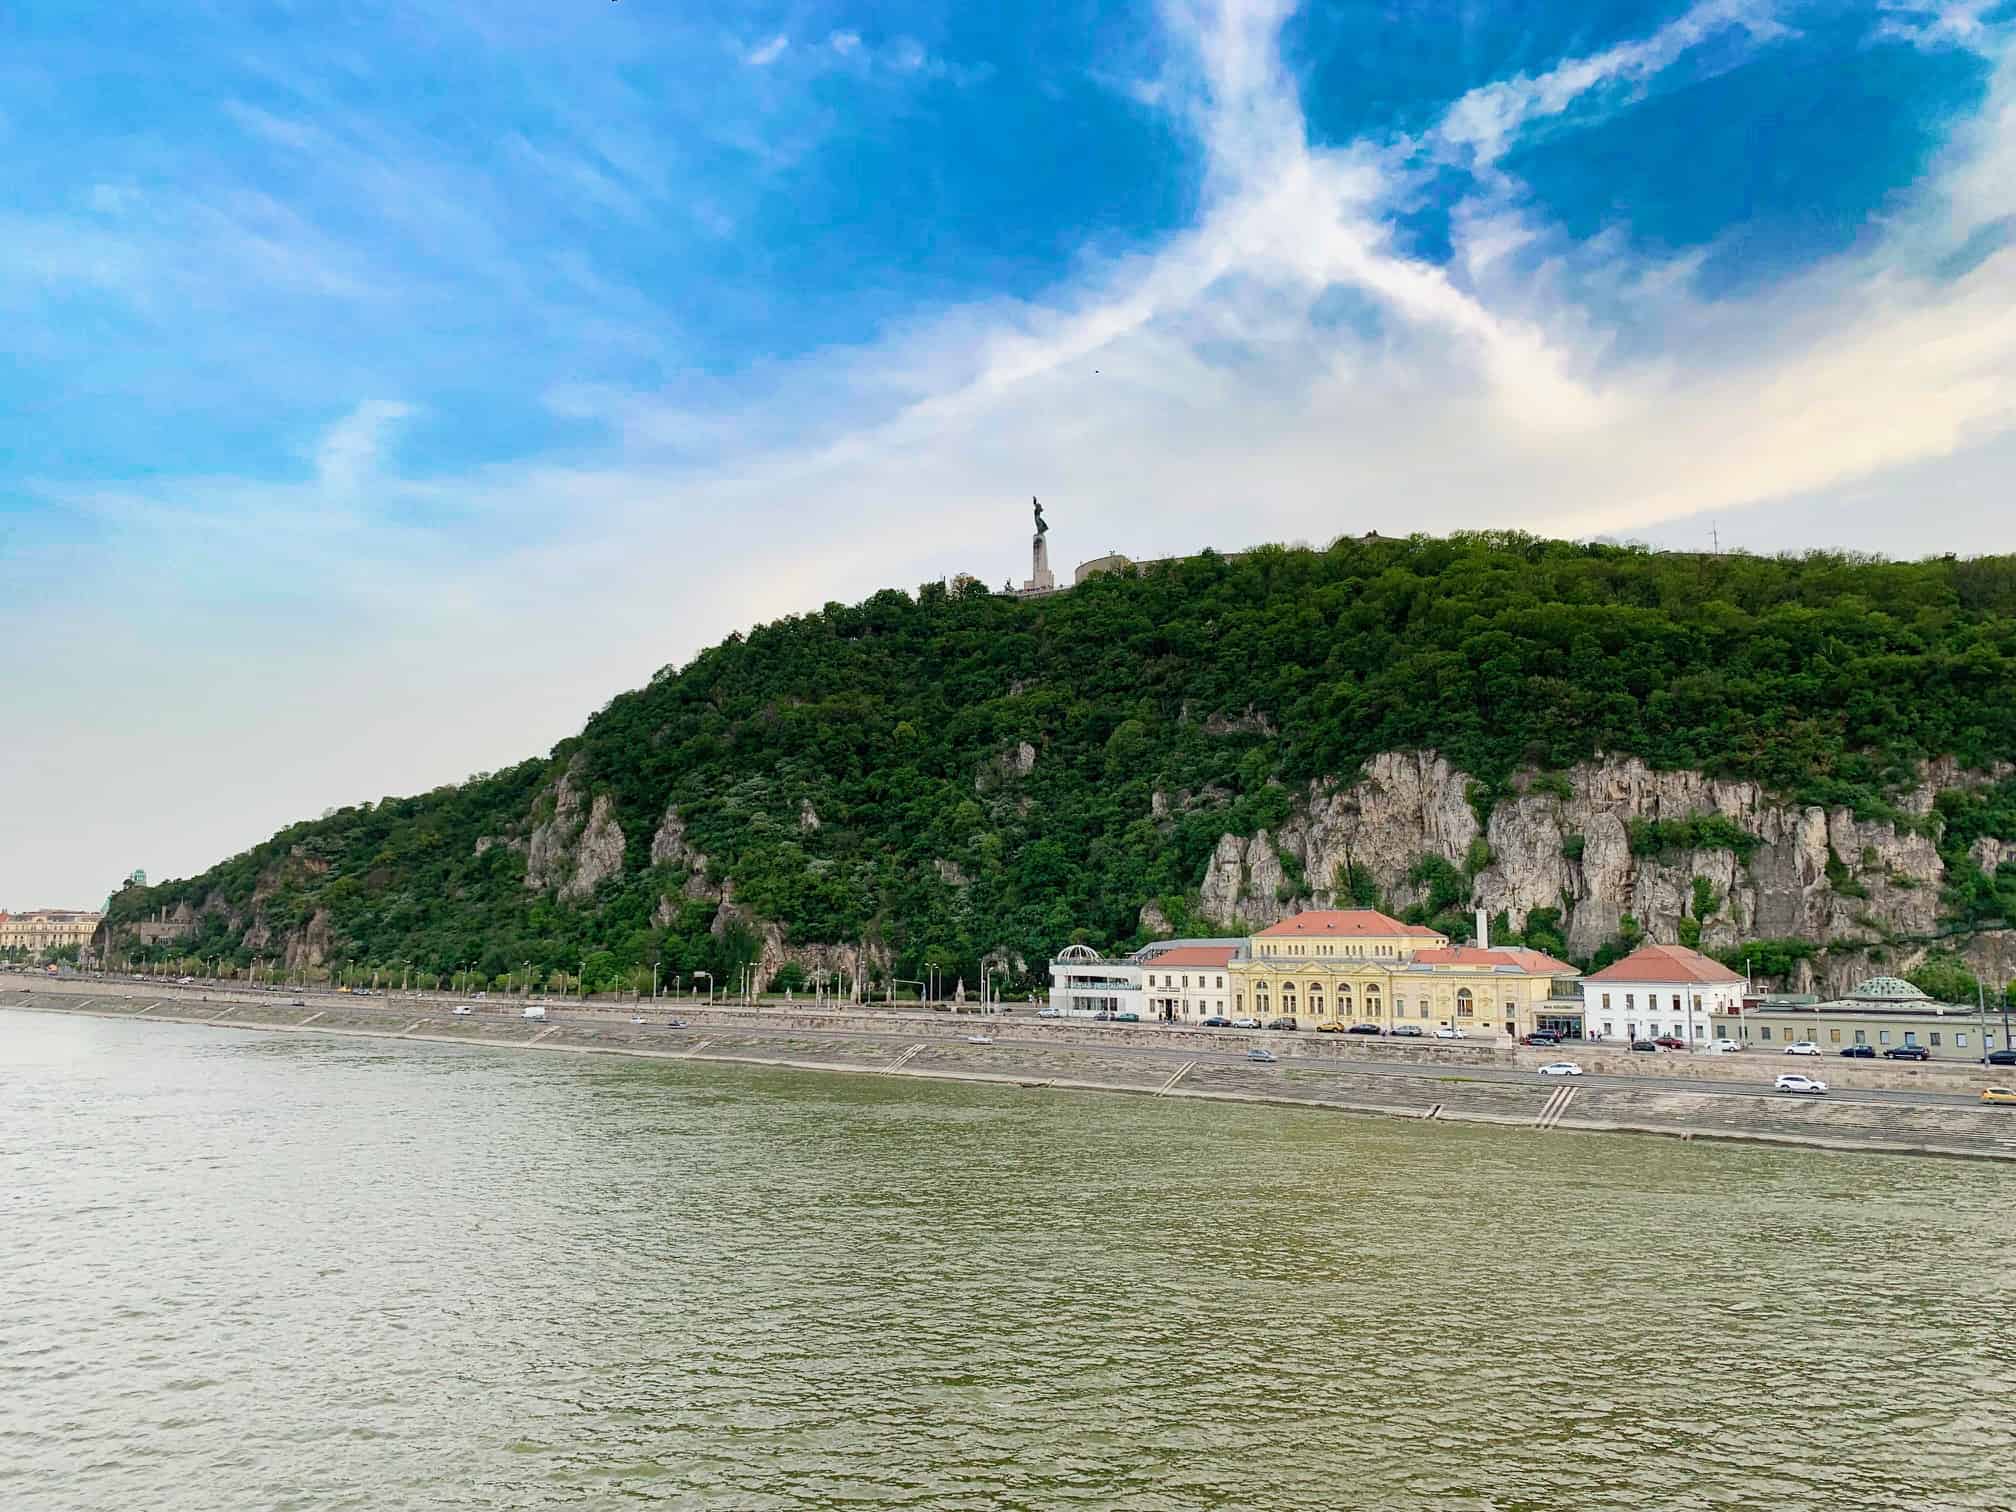 Rudas Baths Budapest from across the Danube River